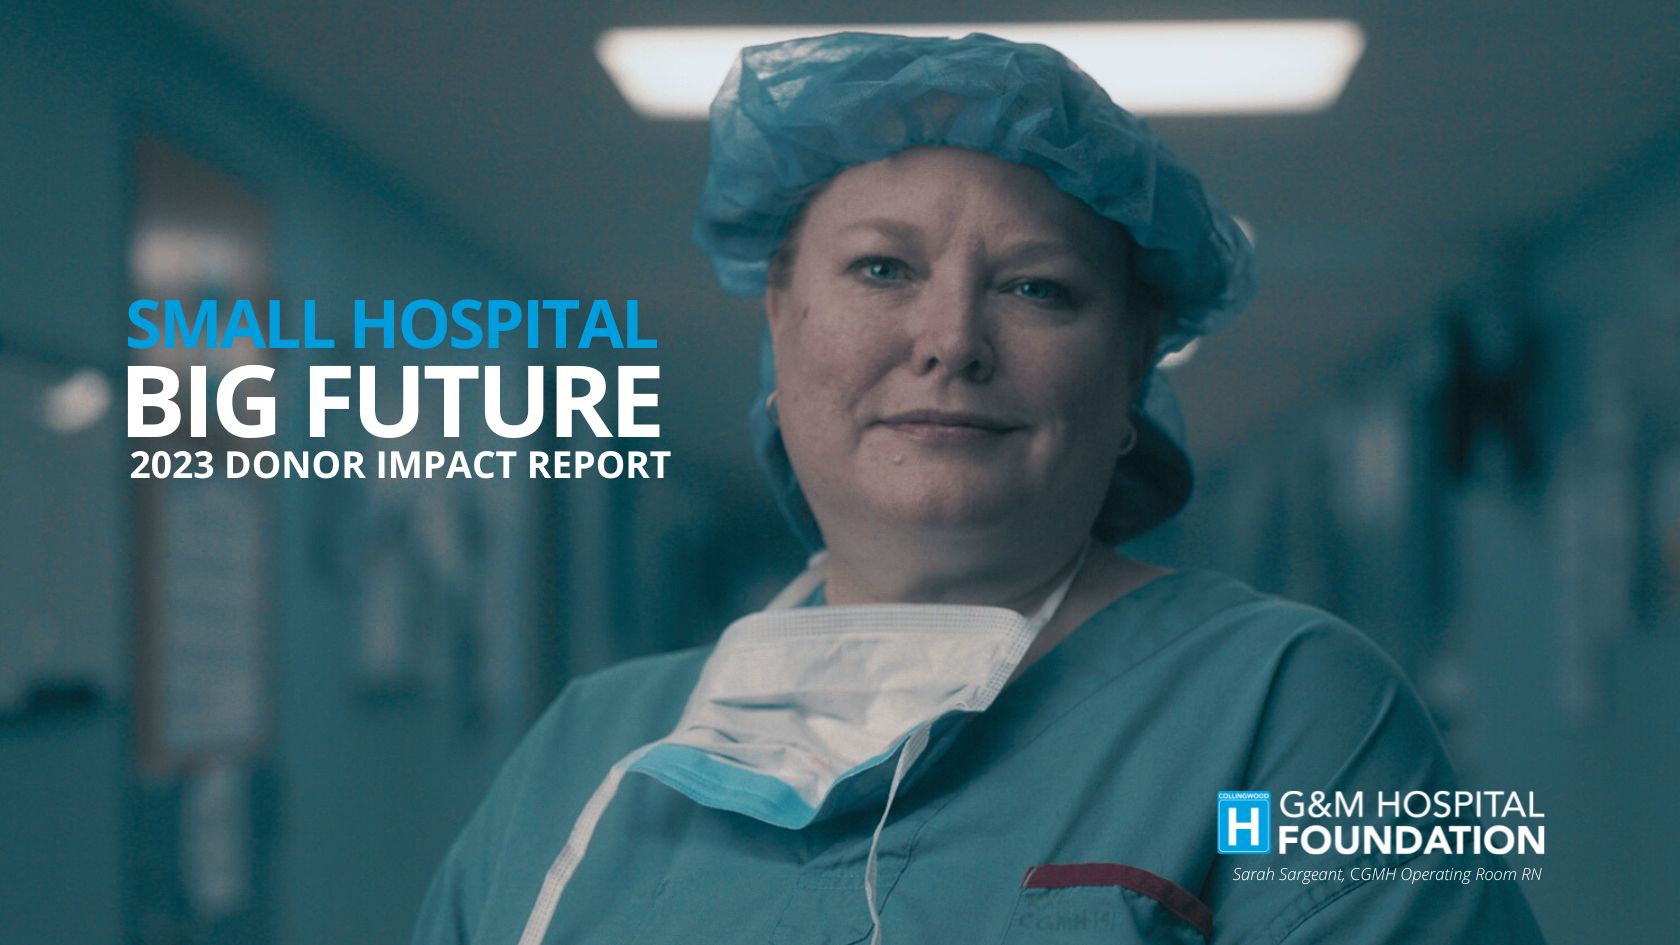 2023 Impact Report: Out Now!